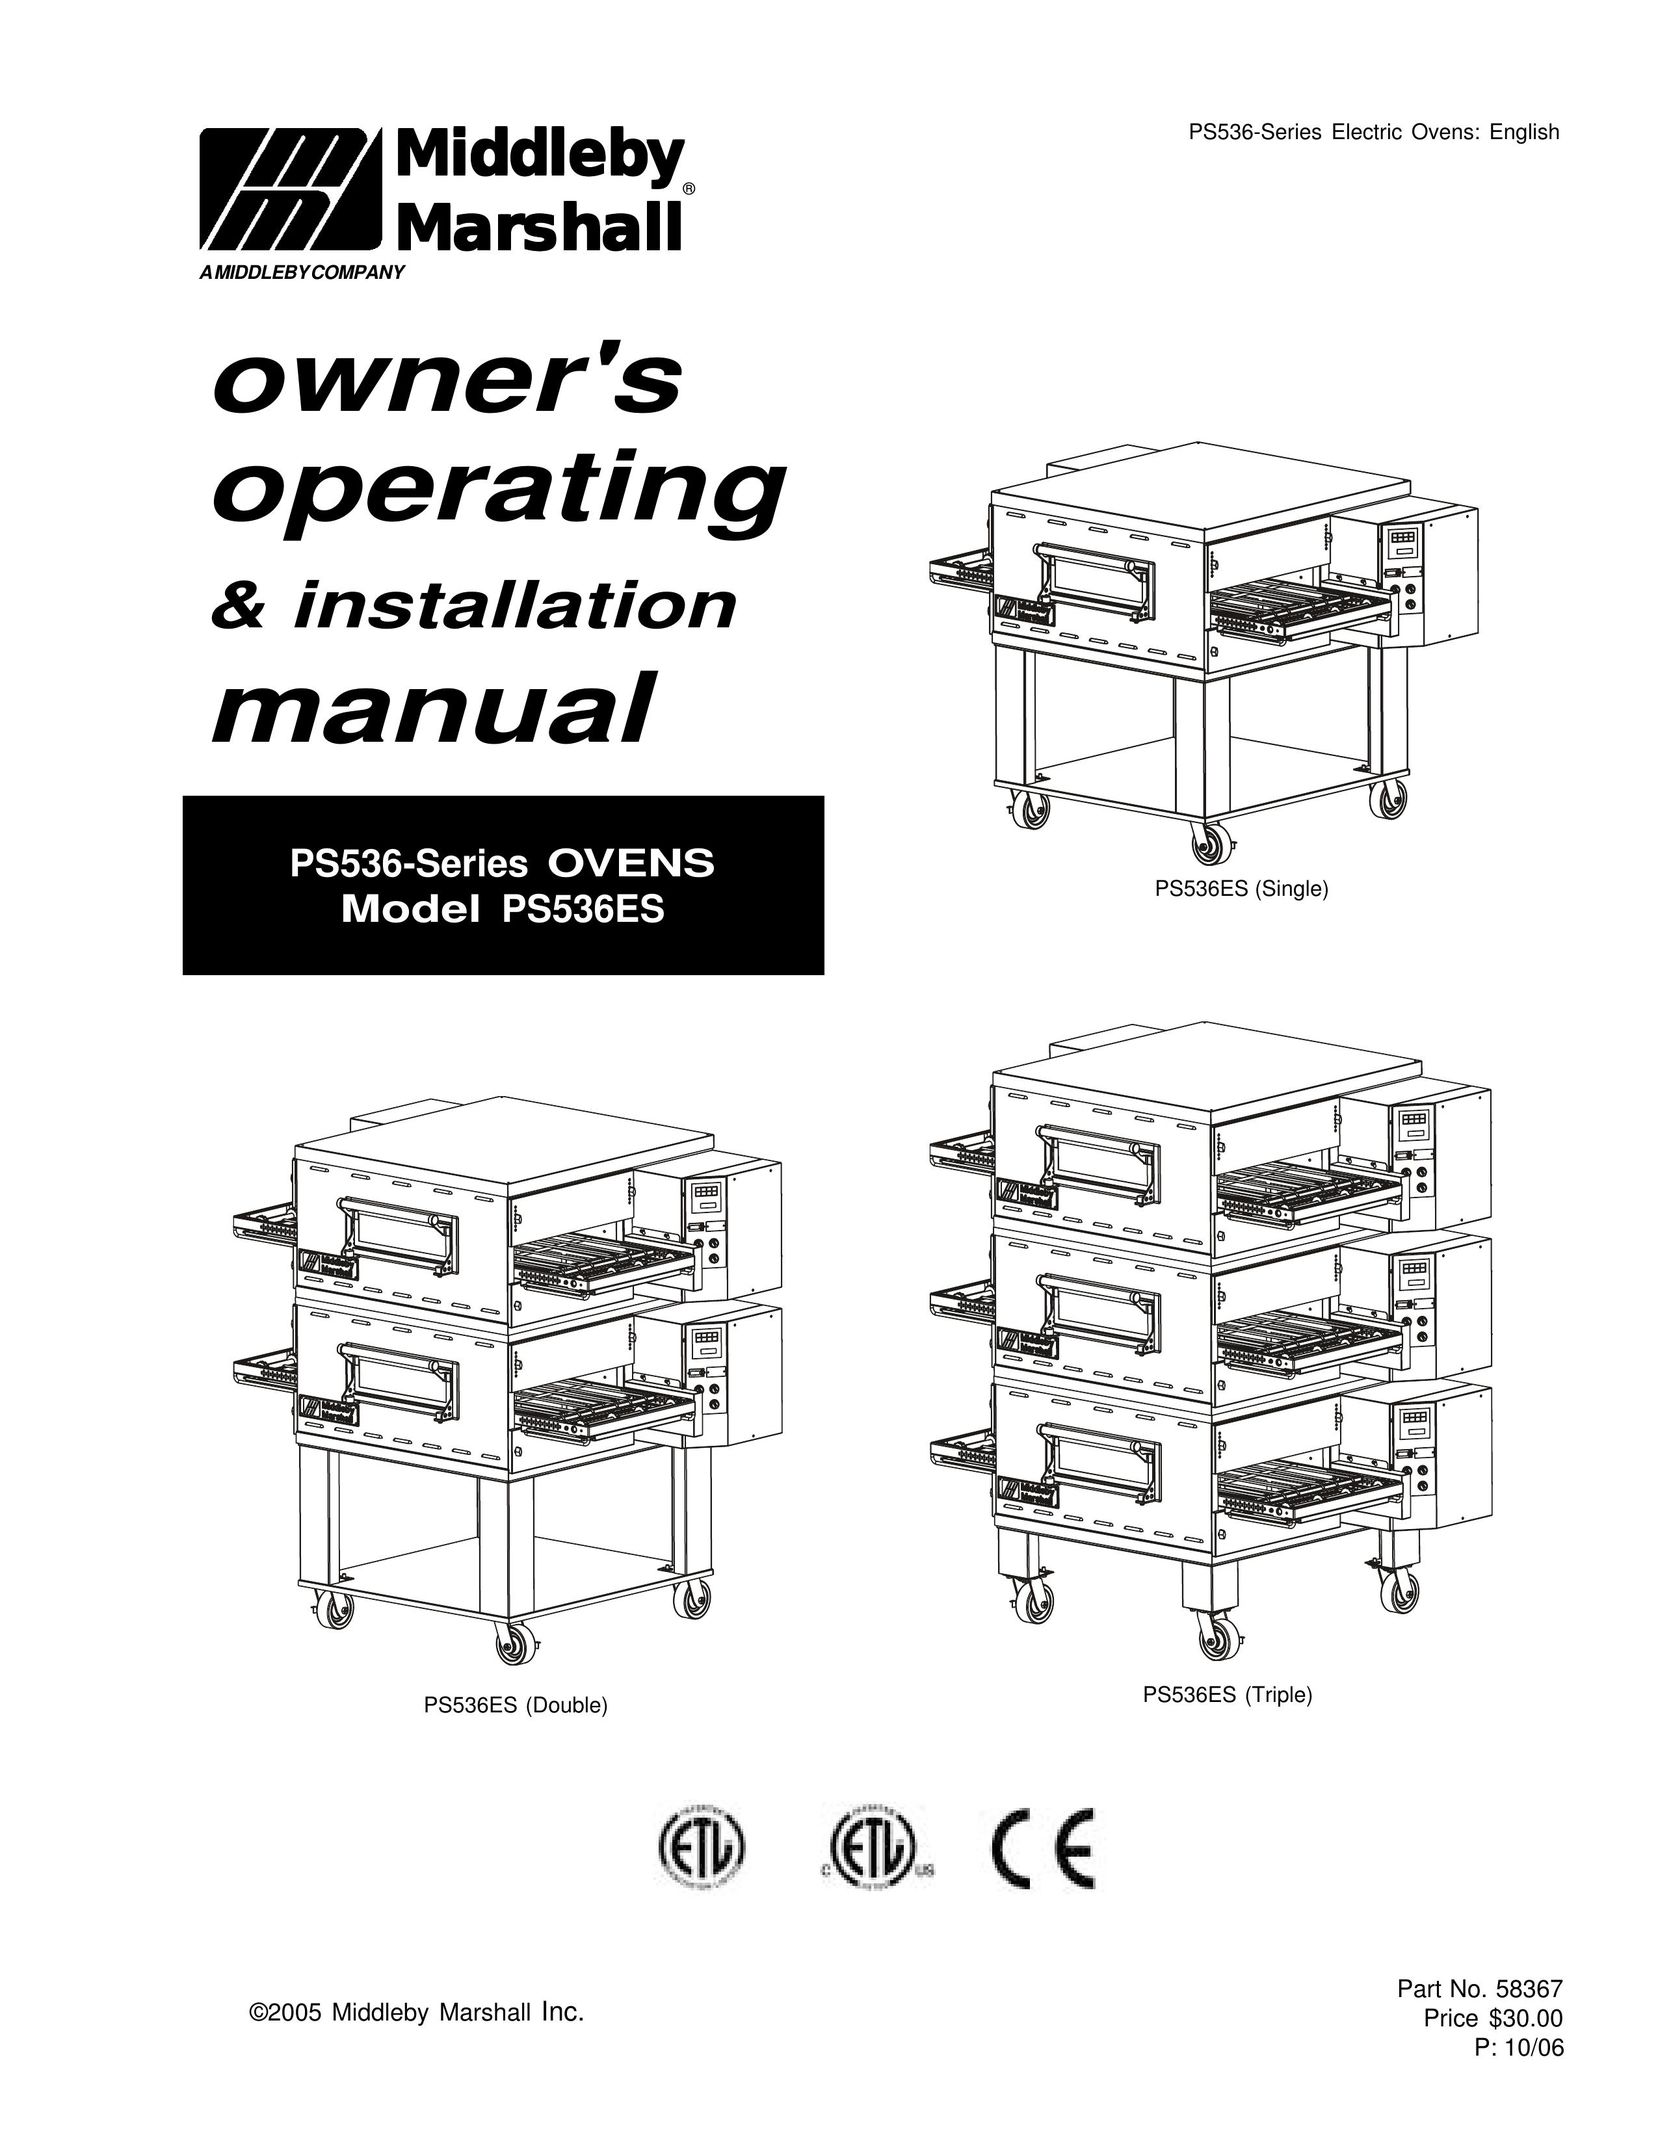 Middleby Marshall PS536ES Oven User Manual